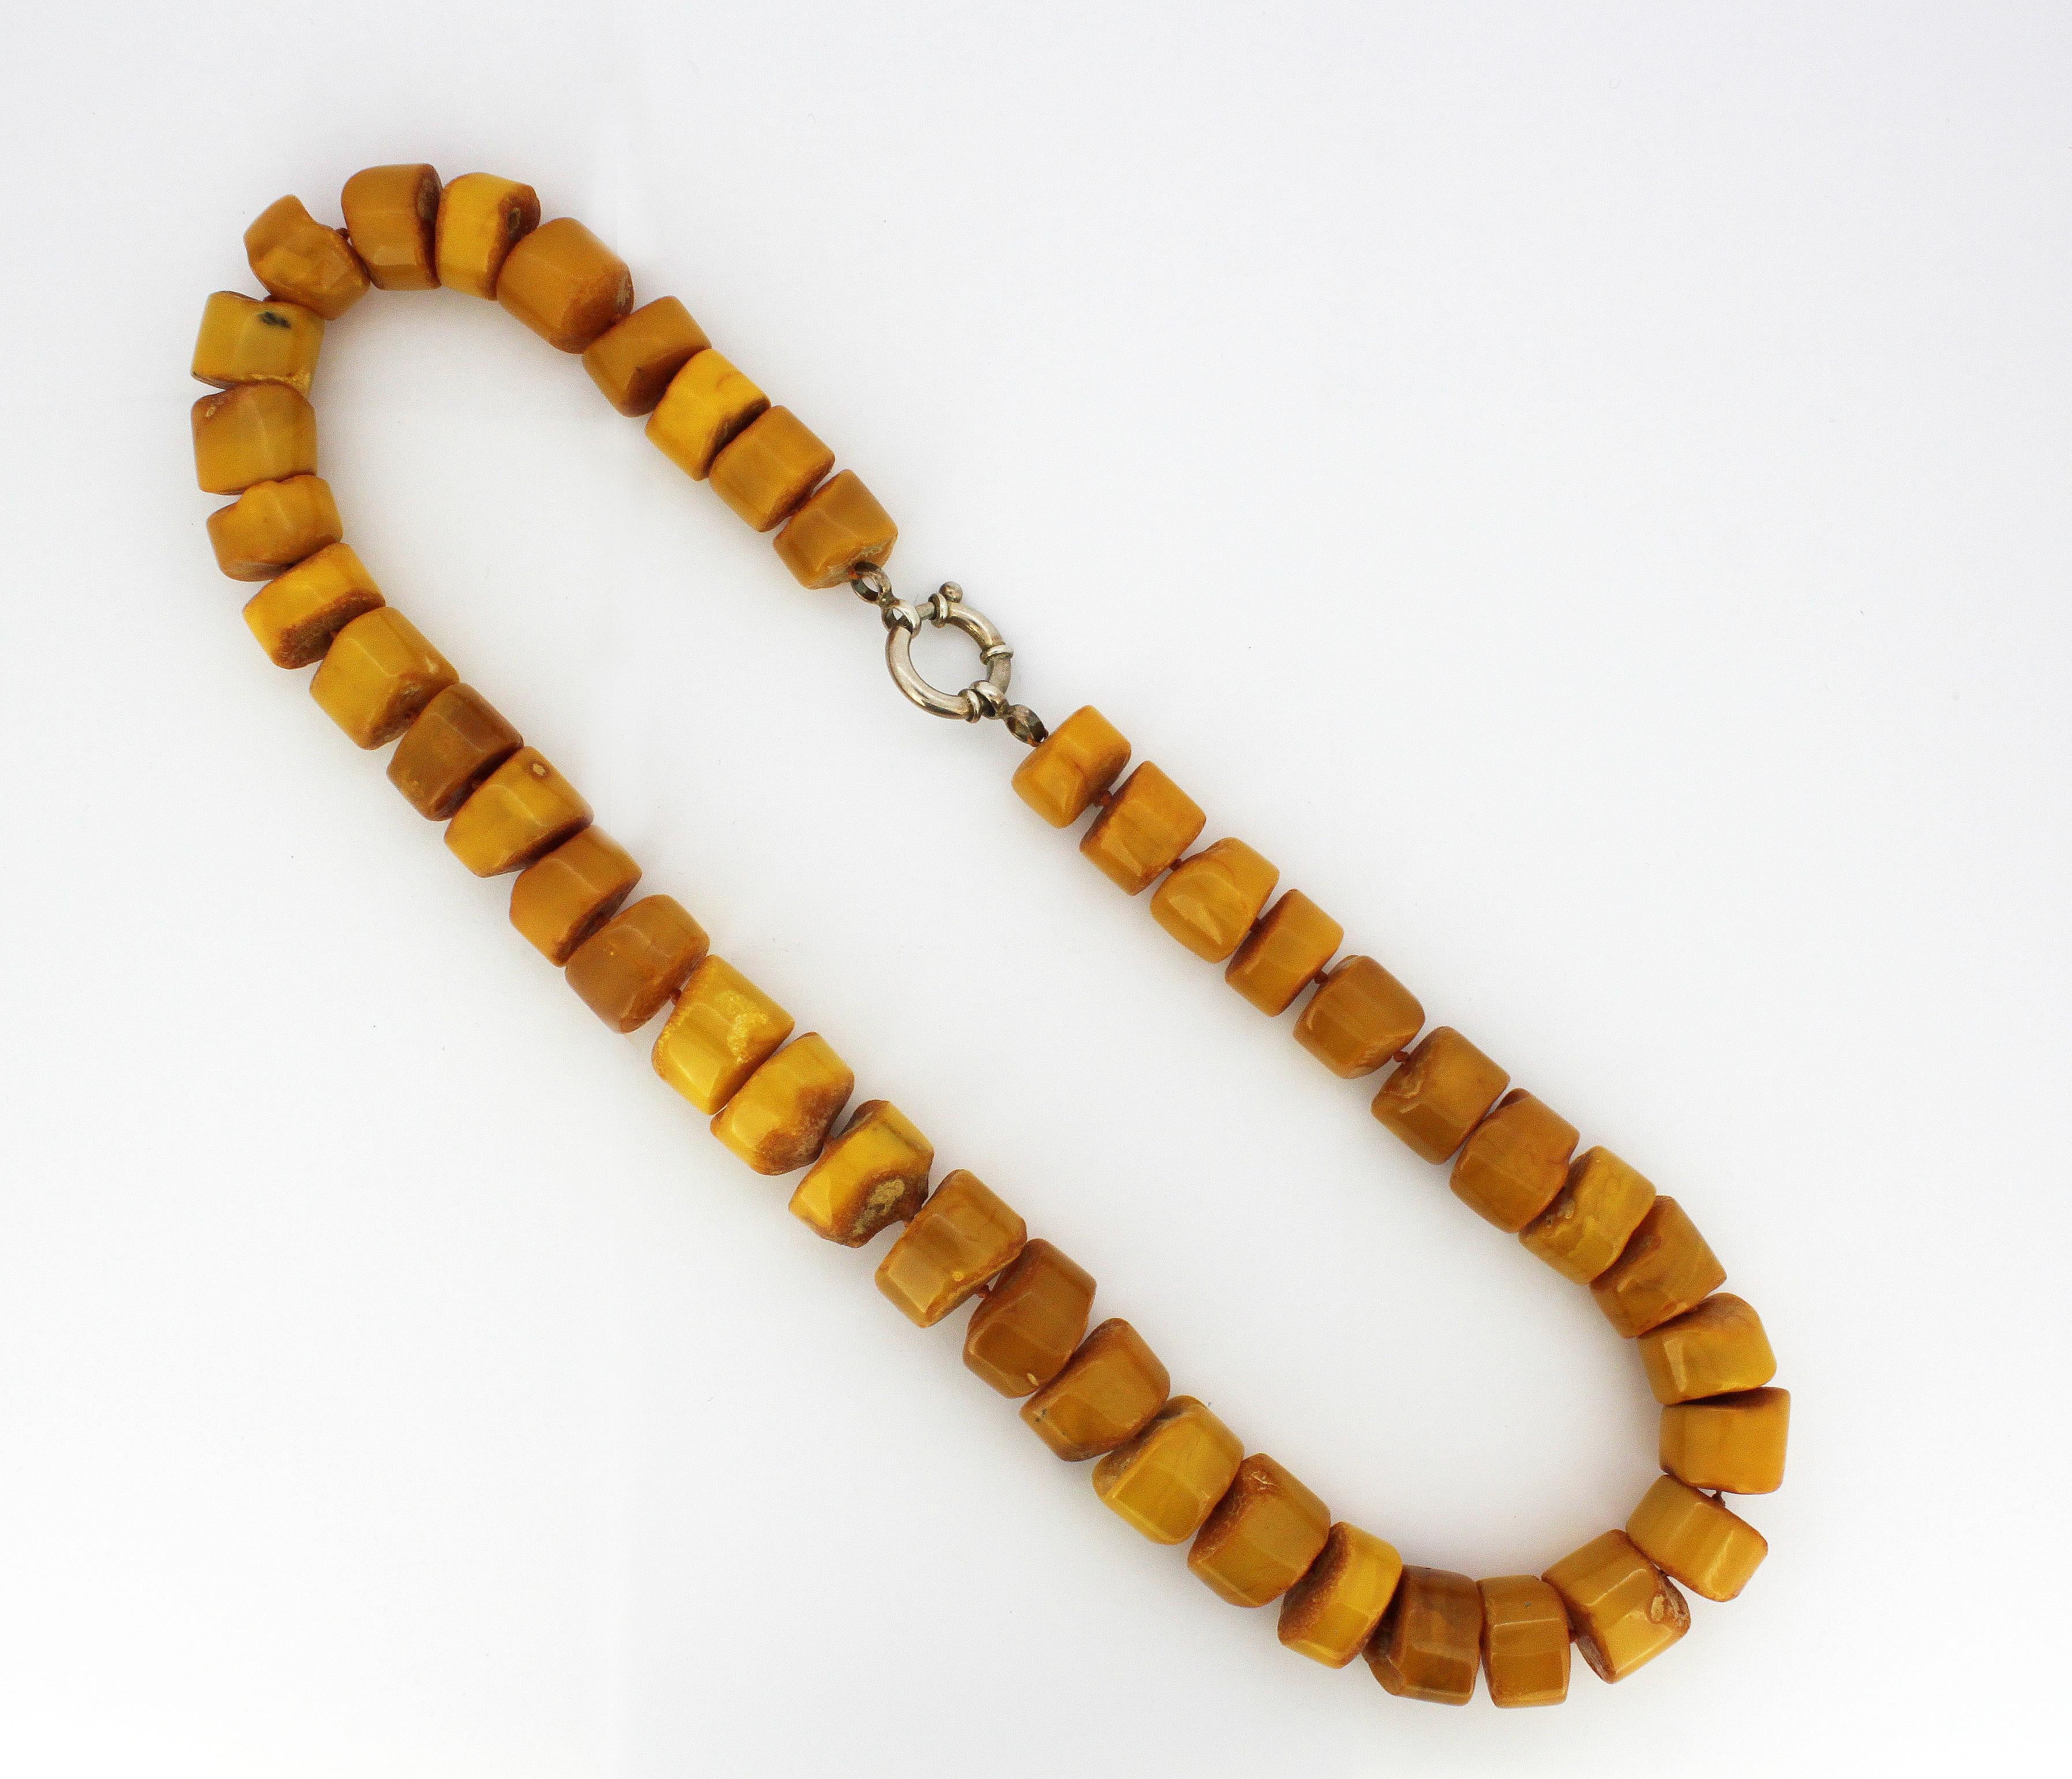 Natural Baltic AMBER NECKLACE Knotted Polished Oval Beads Various Color 11"&13" 